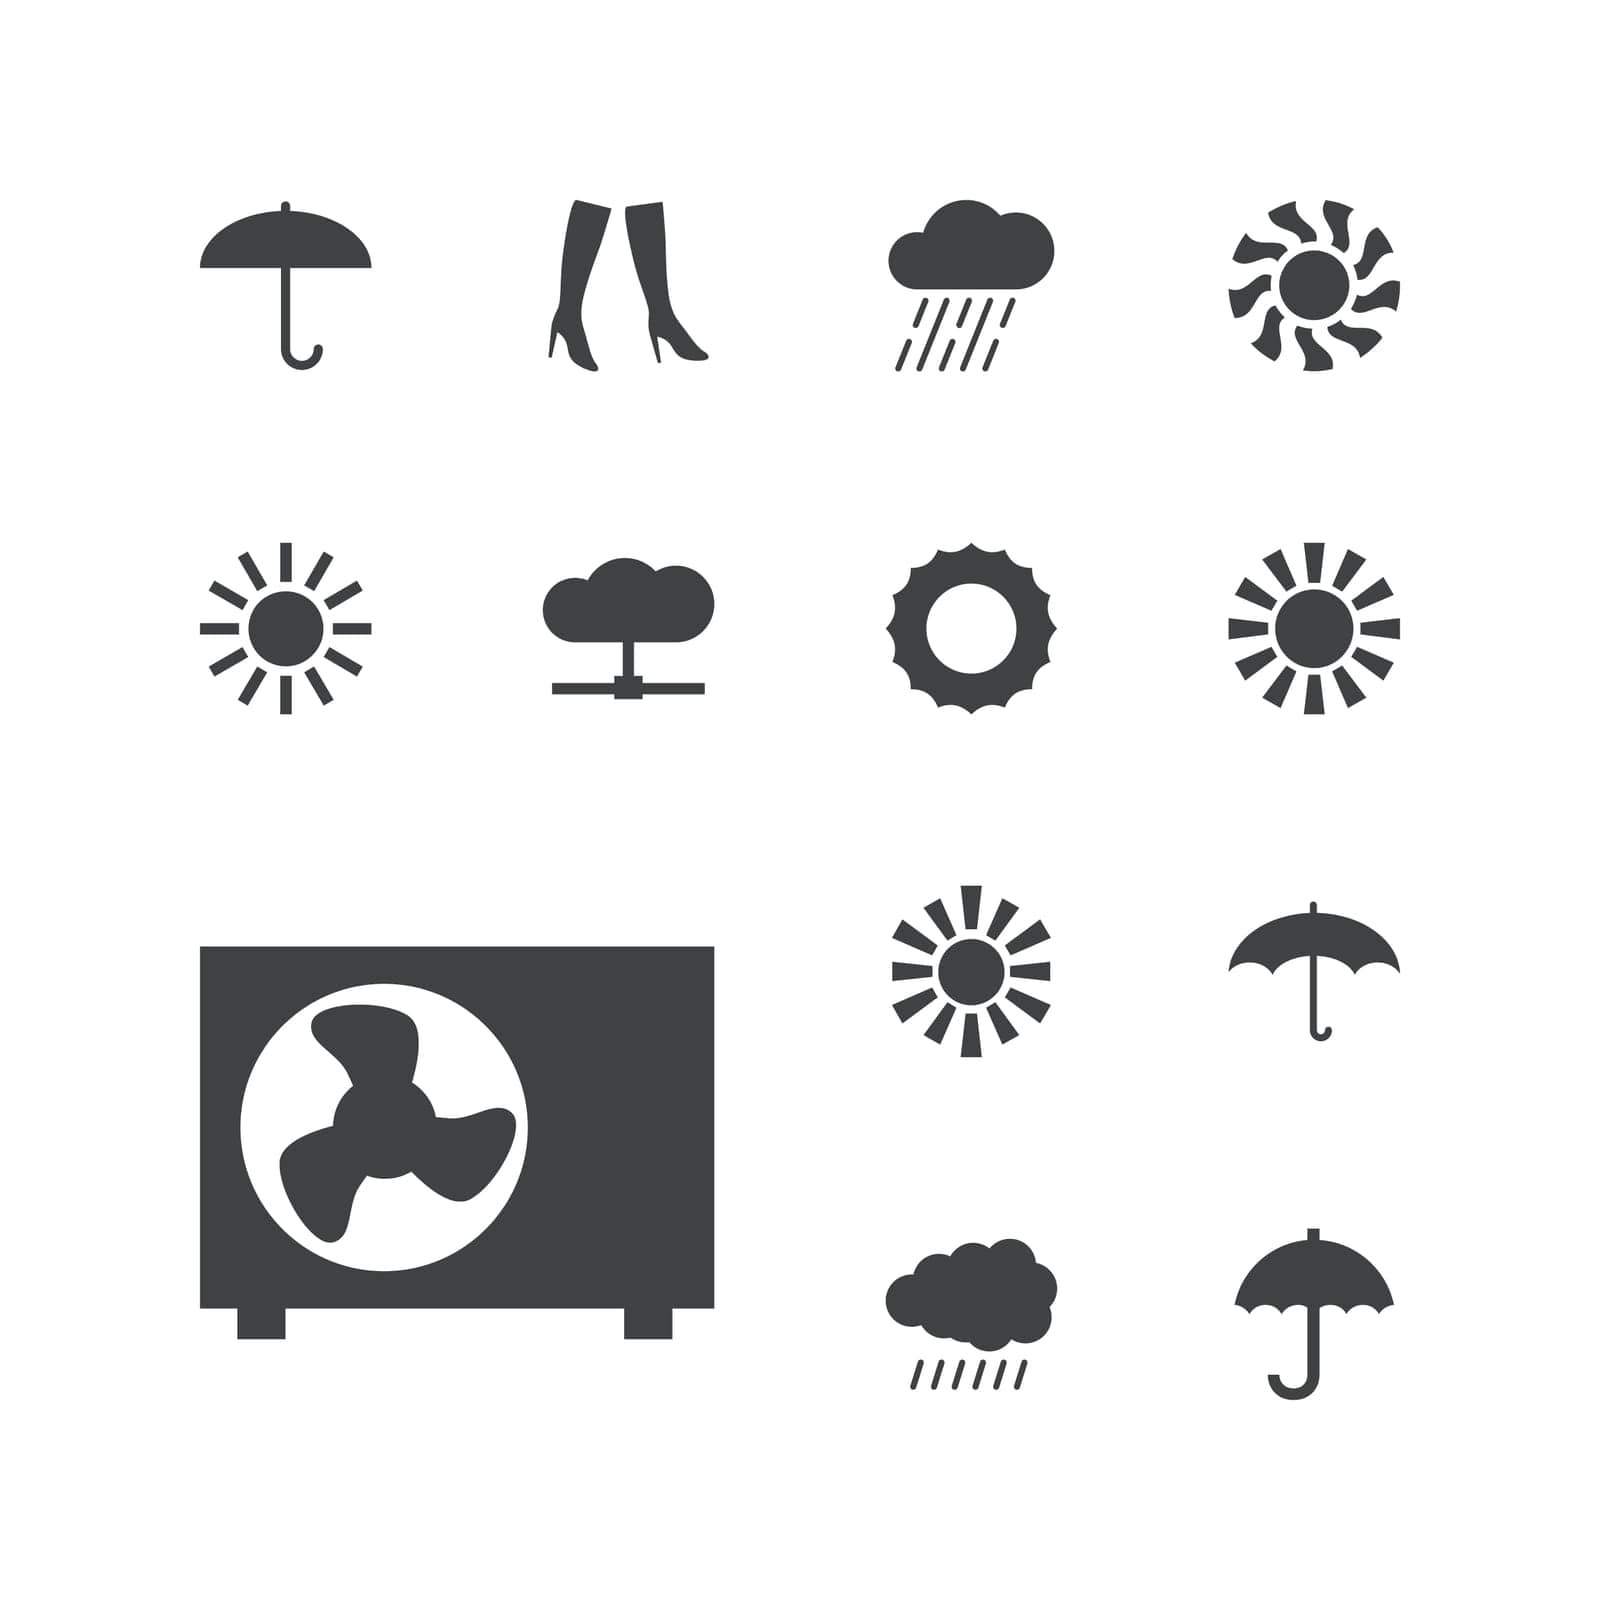 heat,symbol,sunrise,woman,sunshine,happy,icon,sign,bright,isolated,protection,conditioner,air,hot,sun,summer,spring,cloud,white,design,weather,boots,vector,sunny,graphic,element,rain,set,shape,nature,umbrella,black,abstract,climate,warm,sunlight,light,background,sunset,style,illustration,object,fashion